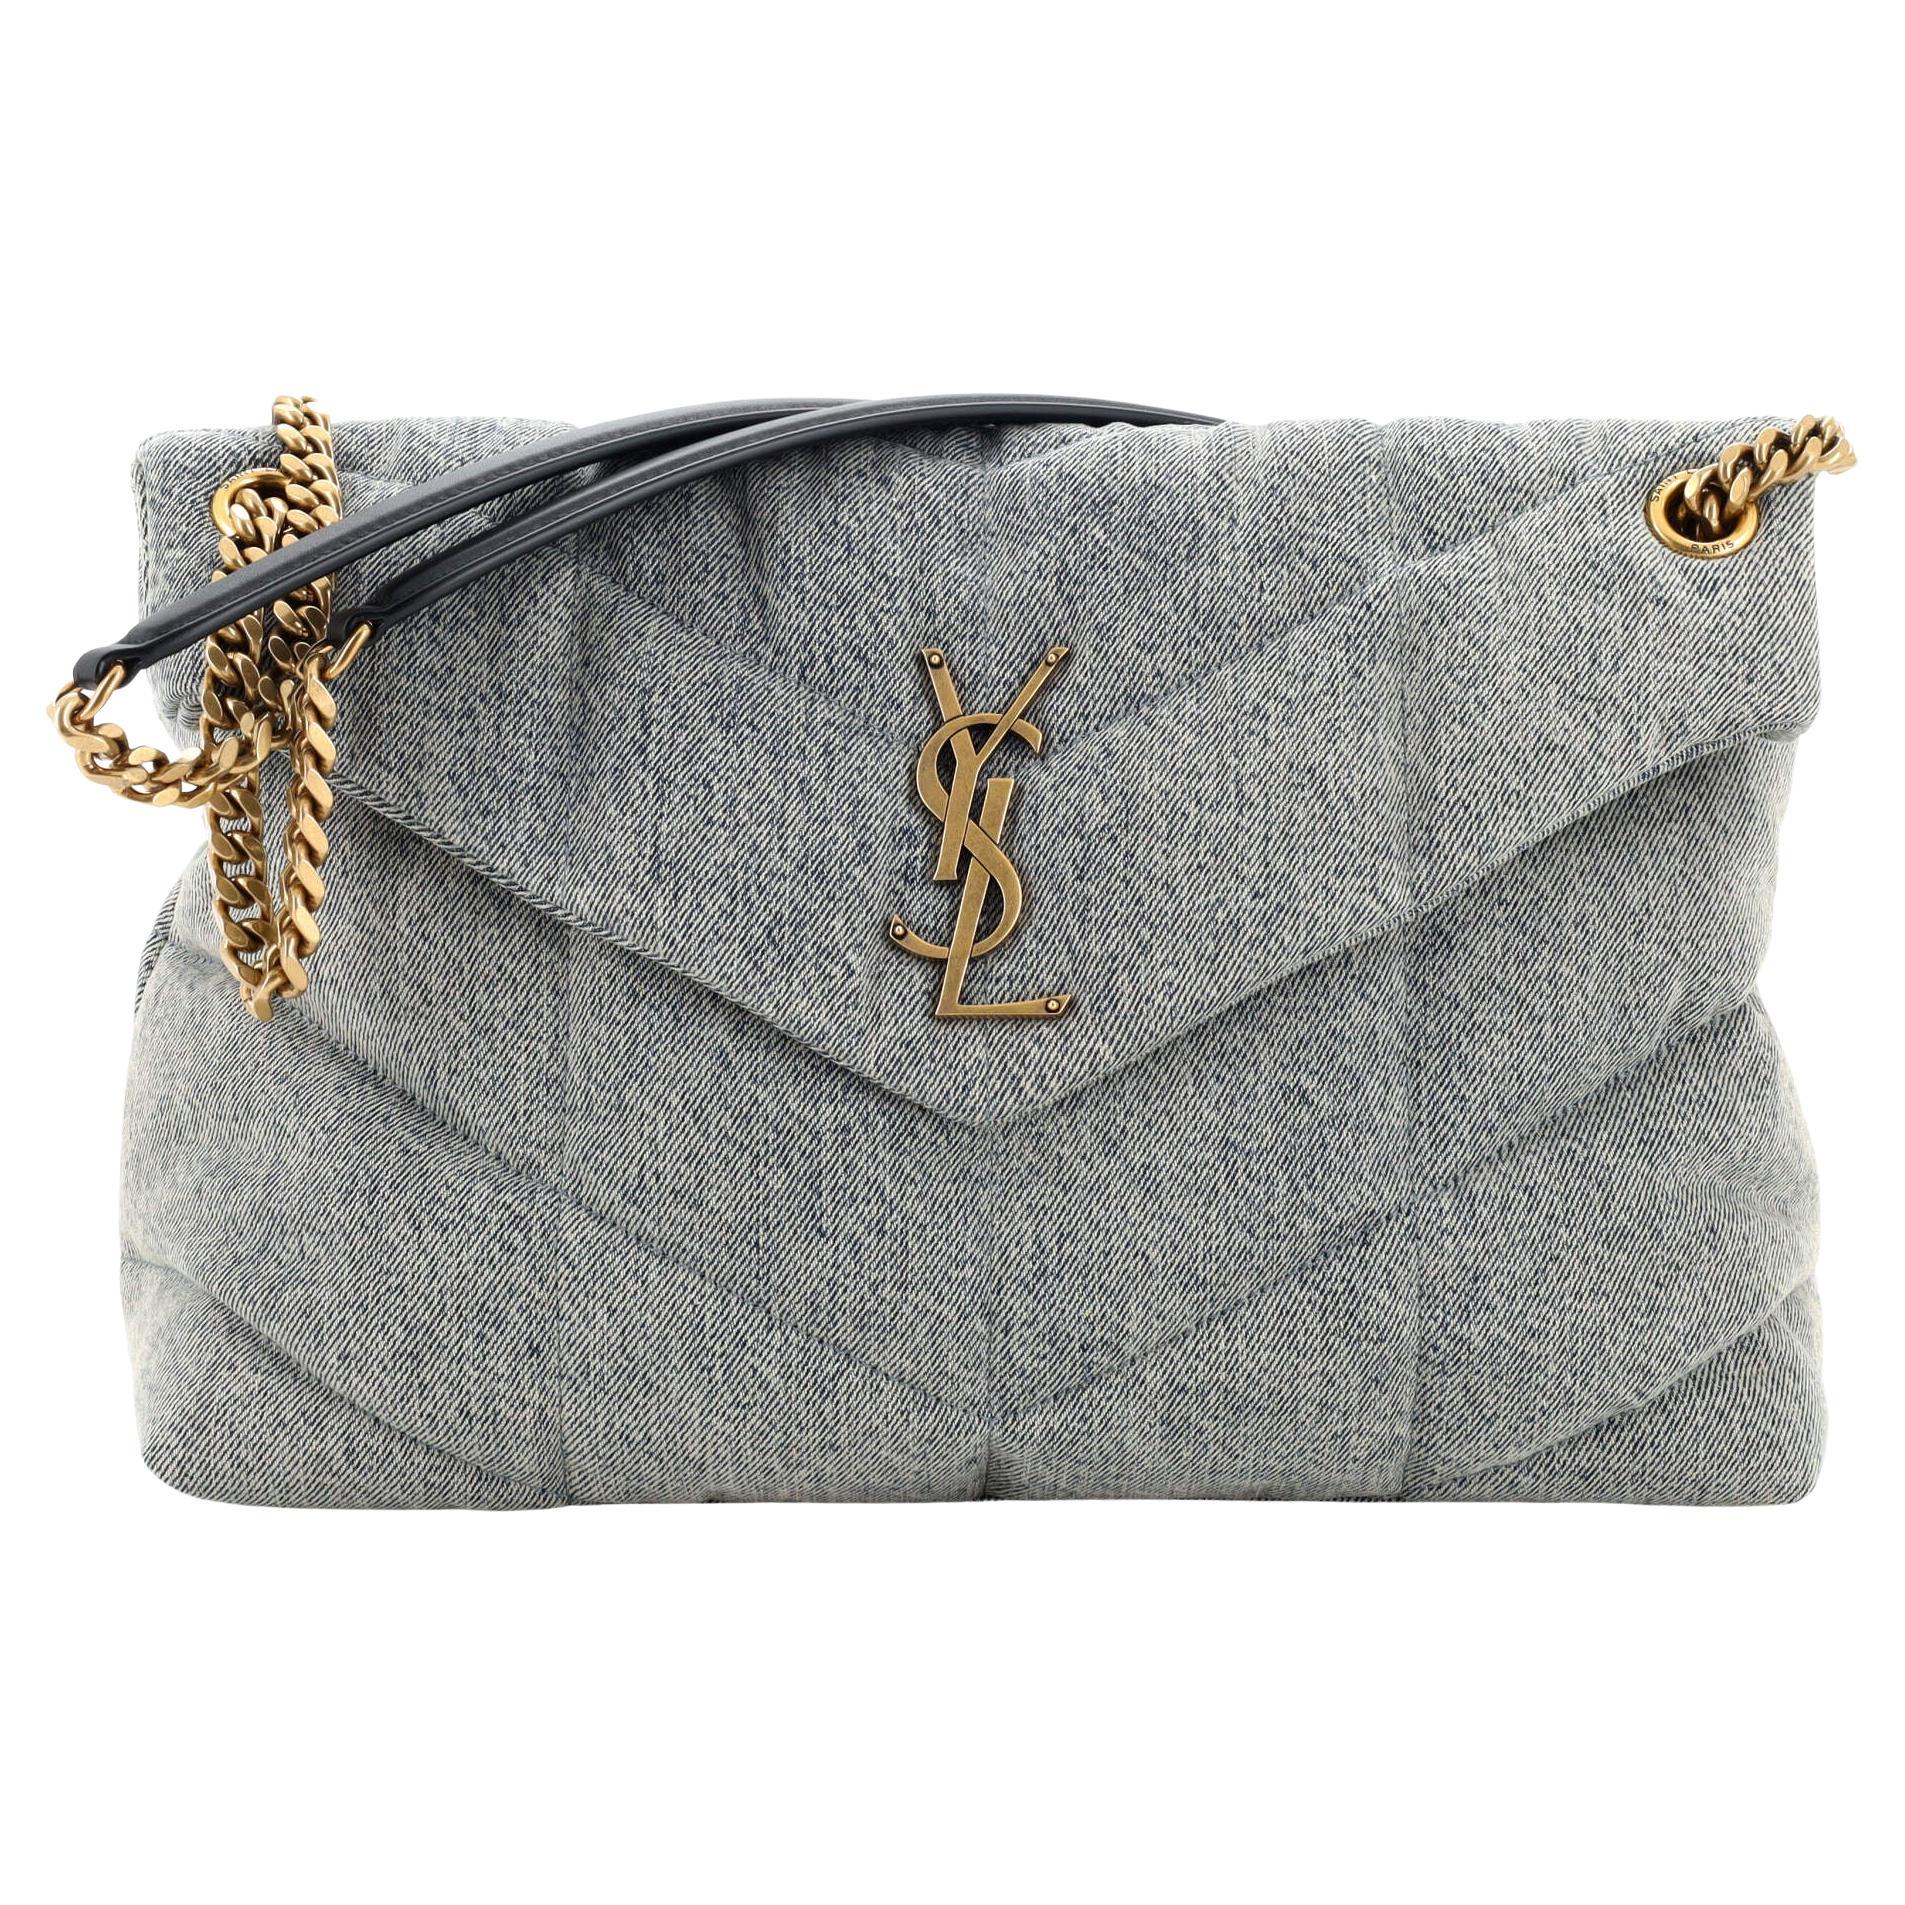 Saint Laurent Loulou Puffer Canvas Clutch in Yellow